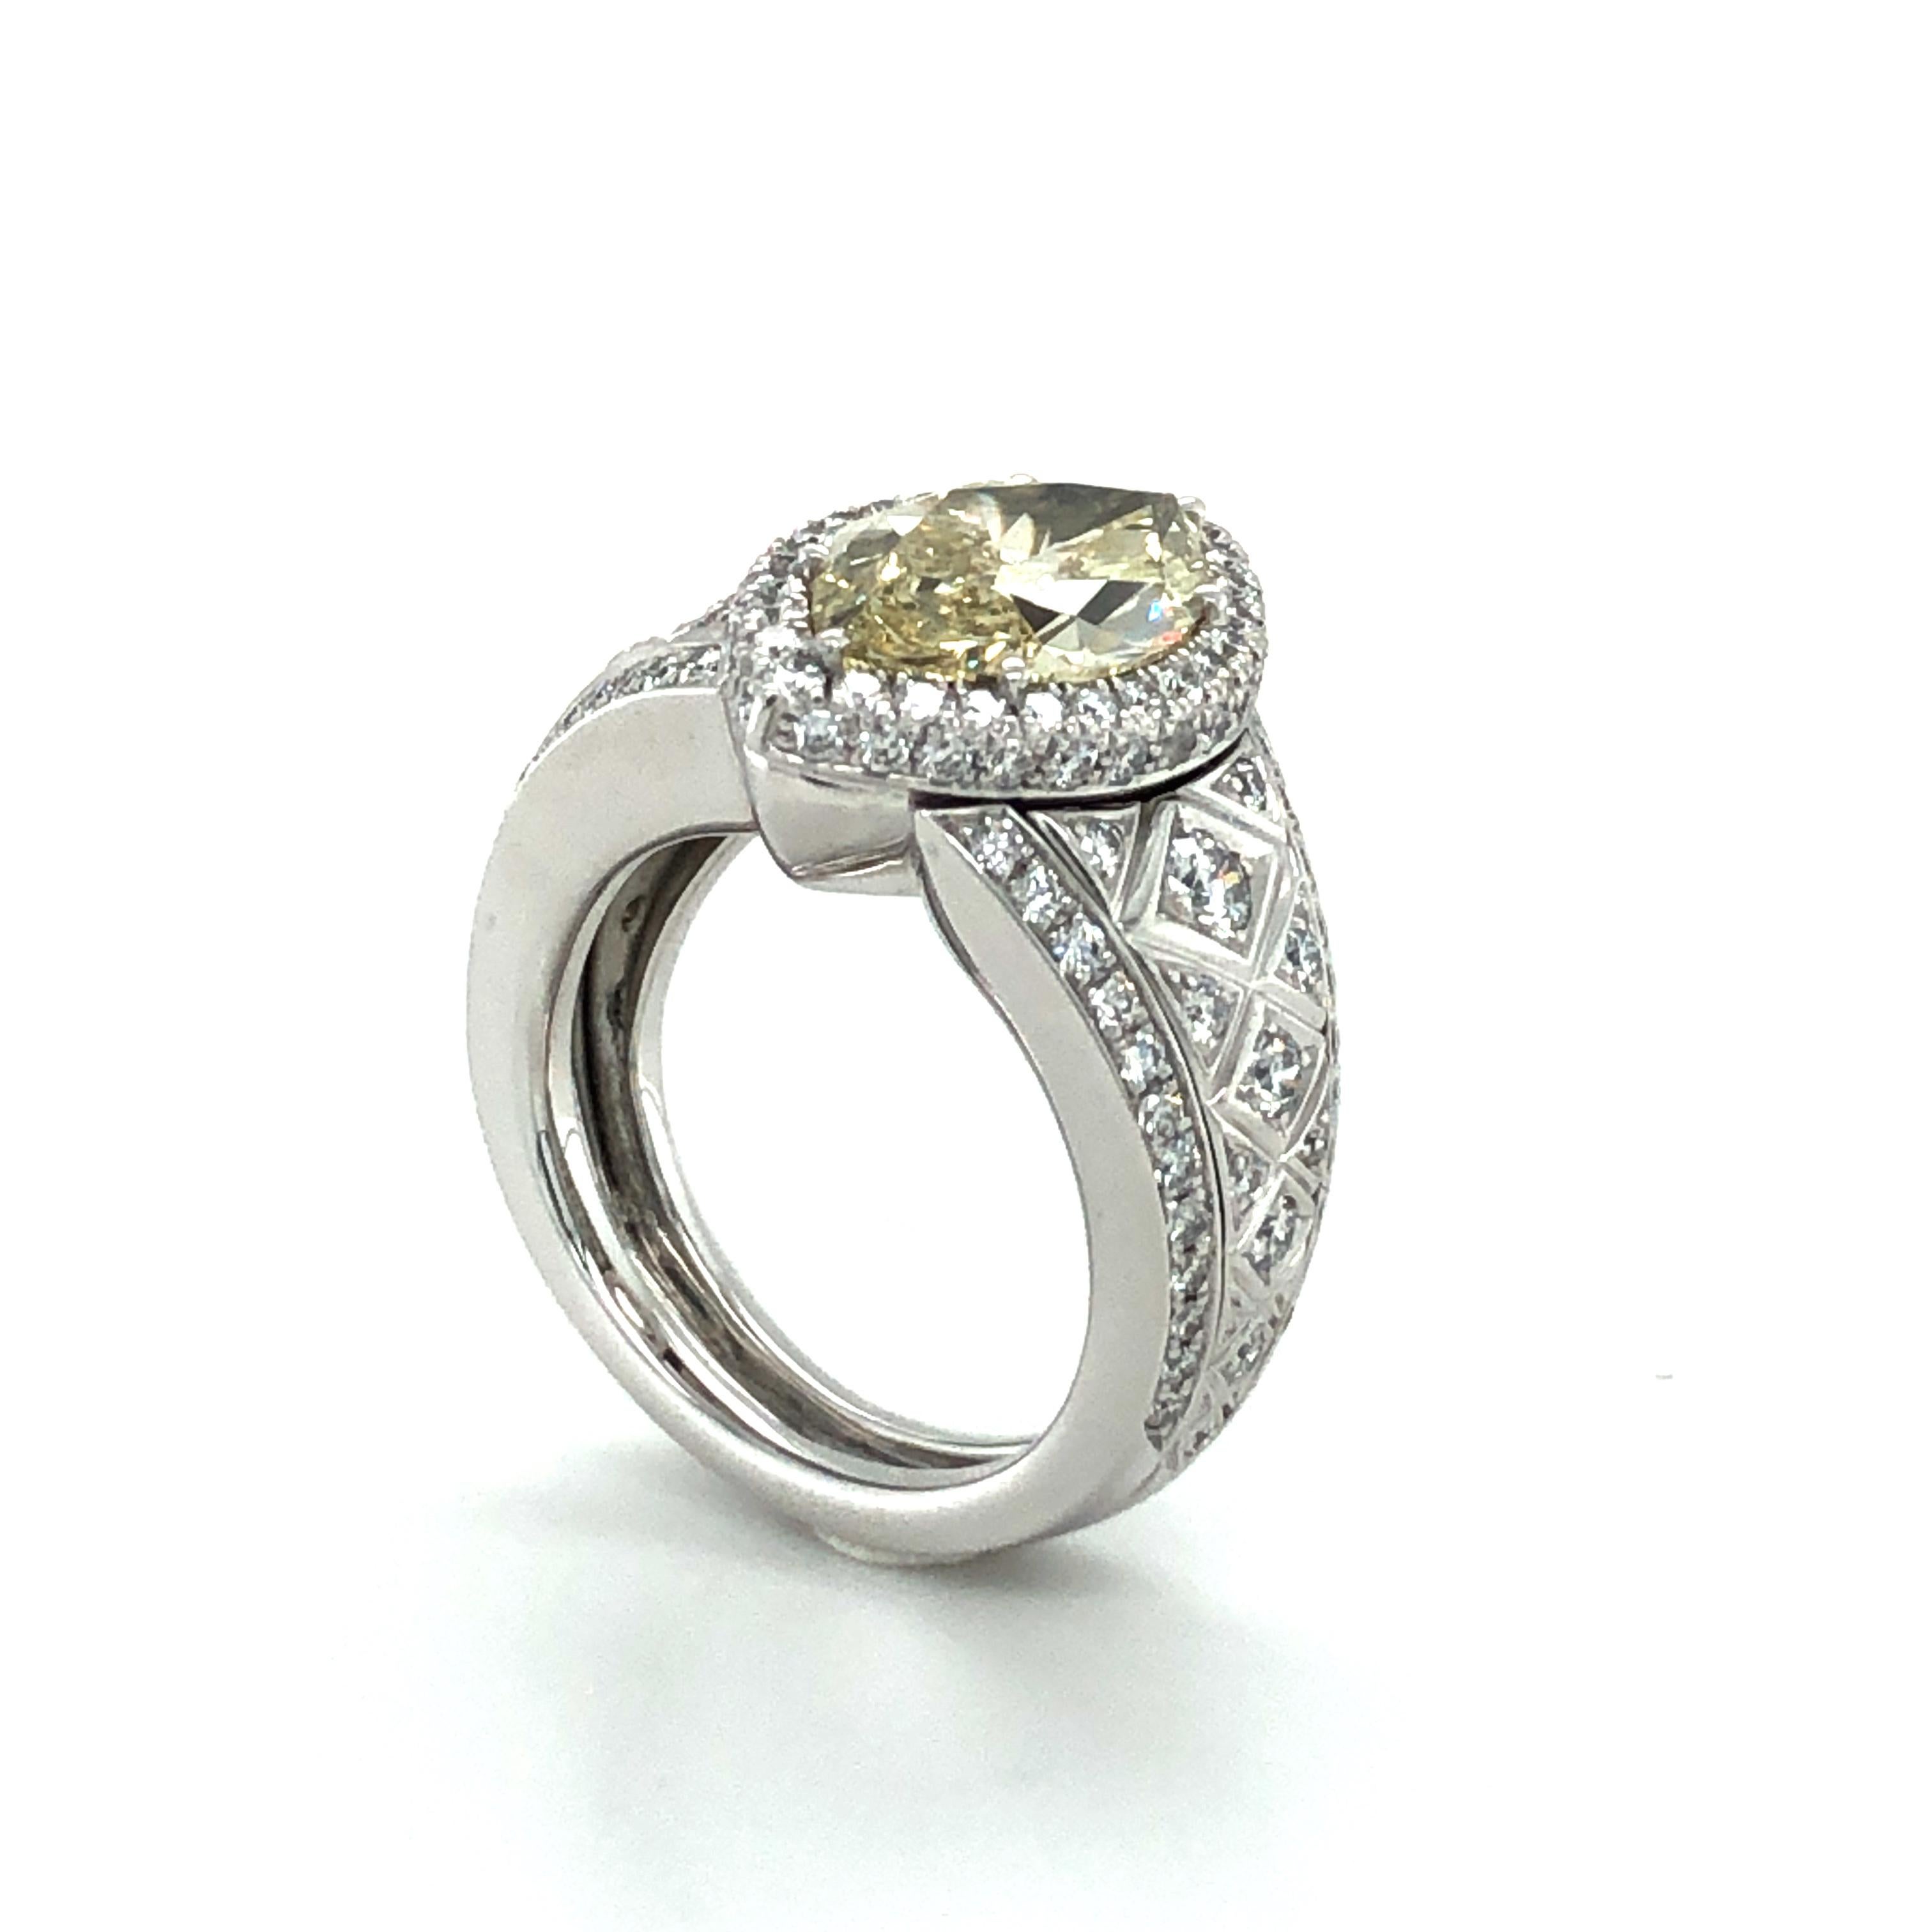 2.77 Carat Marquise-Cut Diamond Ring by Avalon Swiss in 18 Karat White Gold For Sale 1